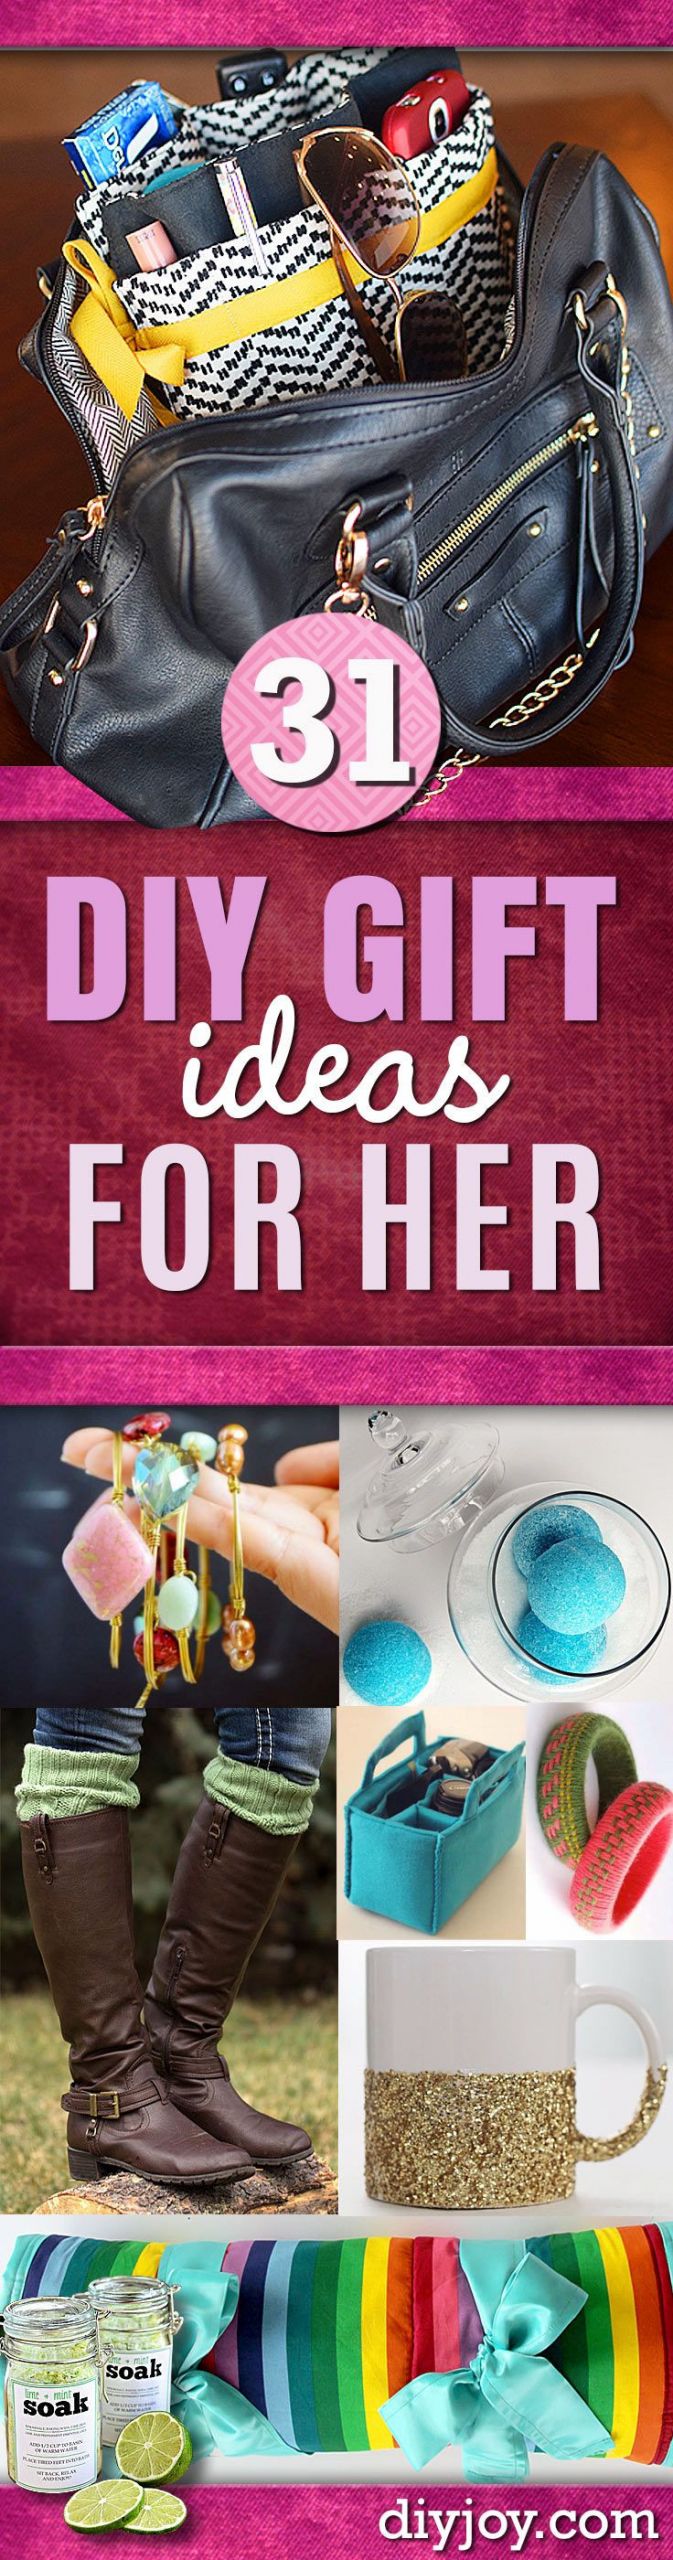 Small Gift Ideas For Girlfriends
 Super Special DIY Gift Ideas for Her DIY JOY